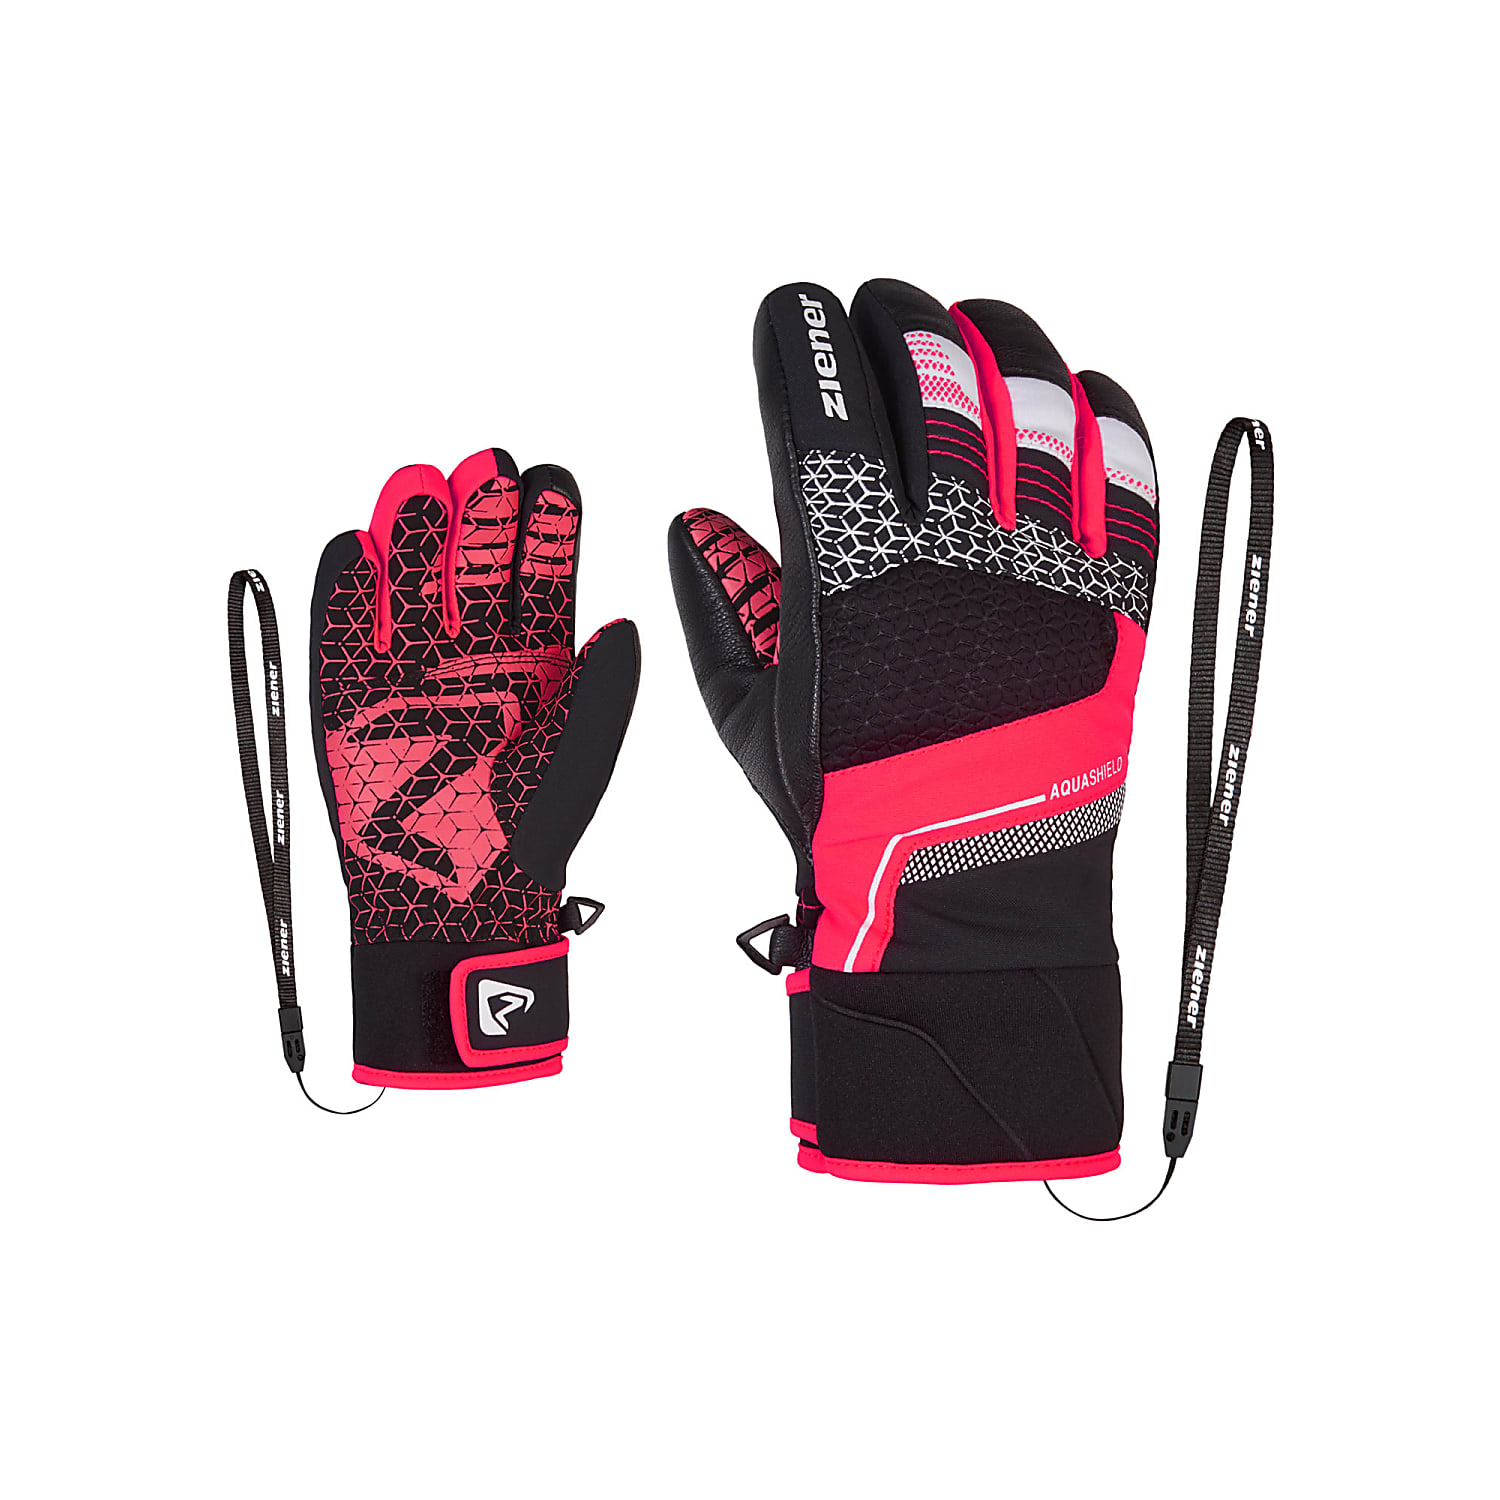 Ziener JUNIOR LONZALO AS PR GLOVE, Black - Neon Pink - Fast and cheap  shipping